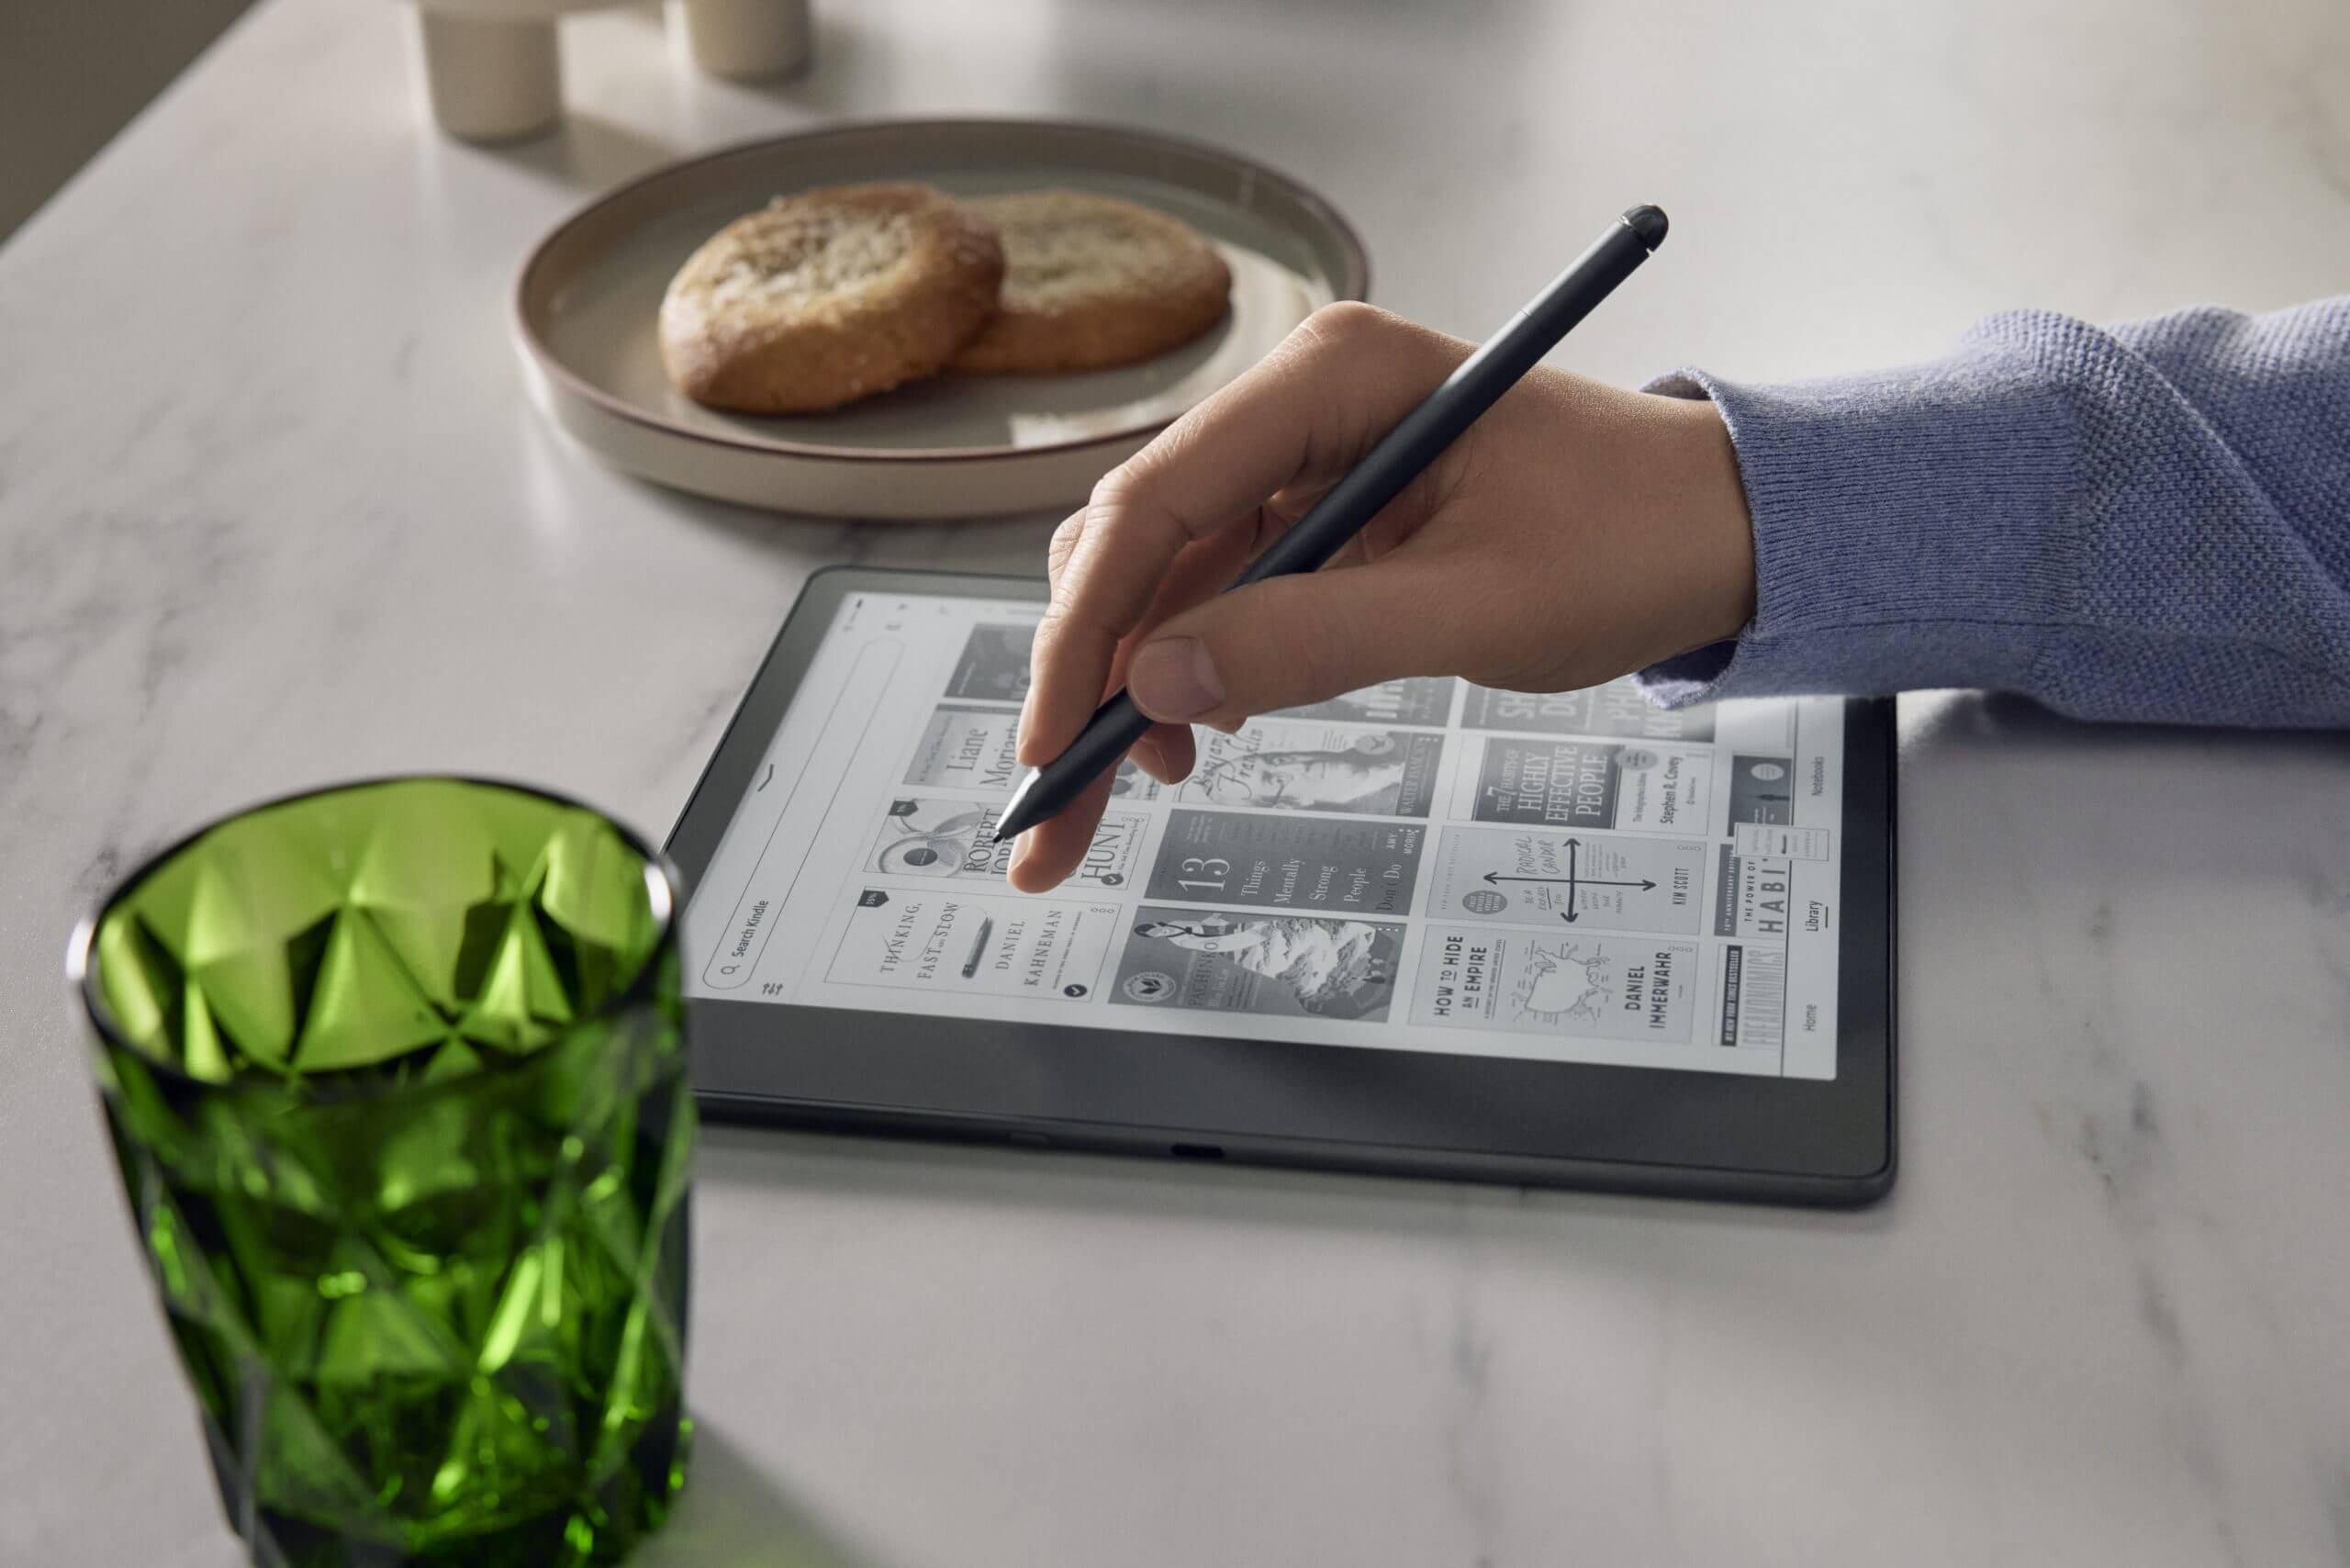 7 Best Kindle Alternatives You Can Buy in 2023